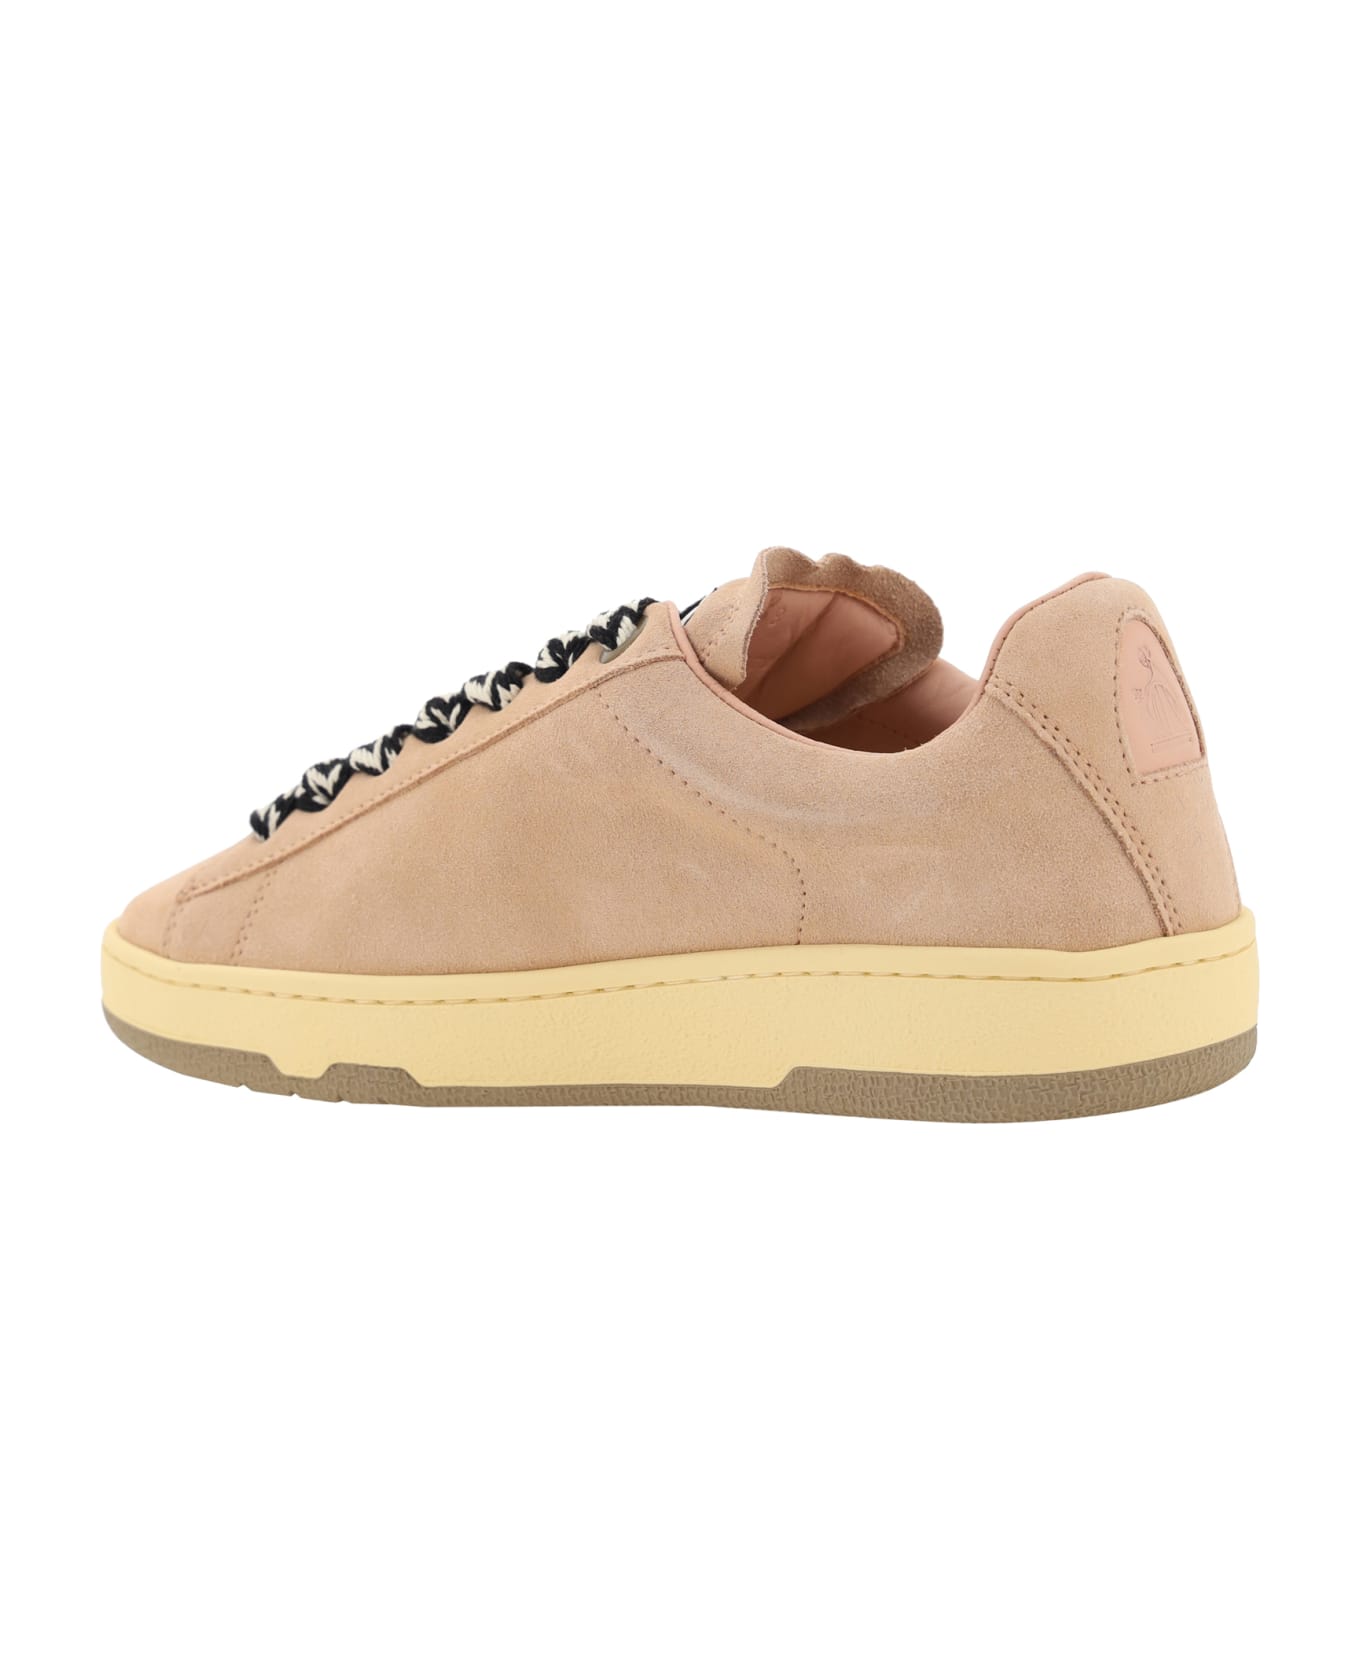 Lanvin Curb Sneakers - Pale Pink スニーカー